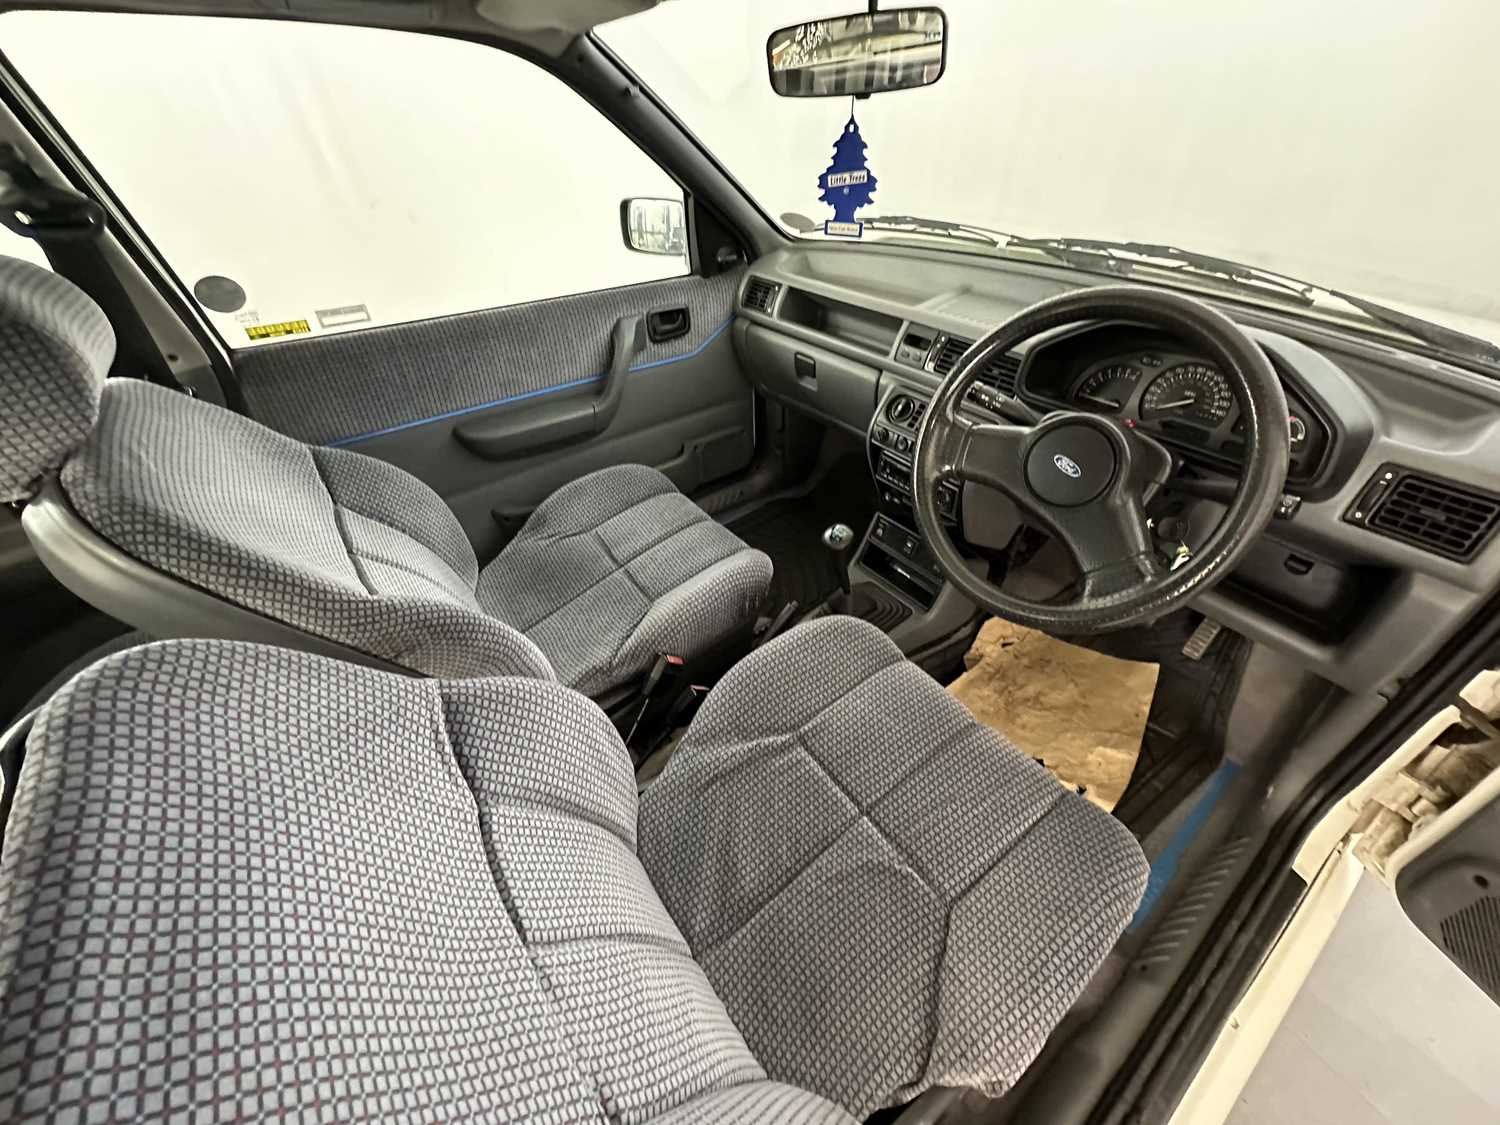 1991 Ford Fiesta XR2i - Image 19 of 30